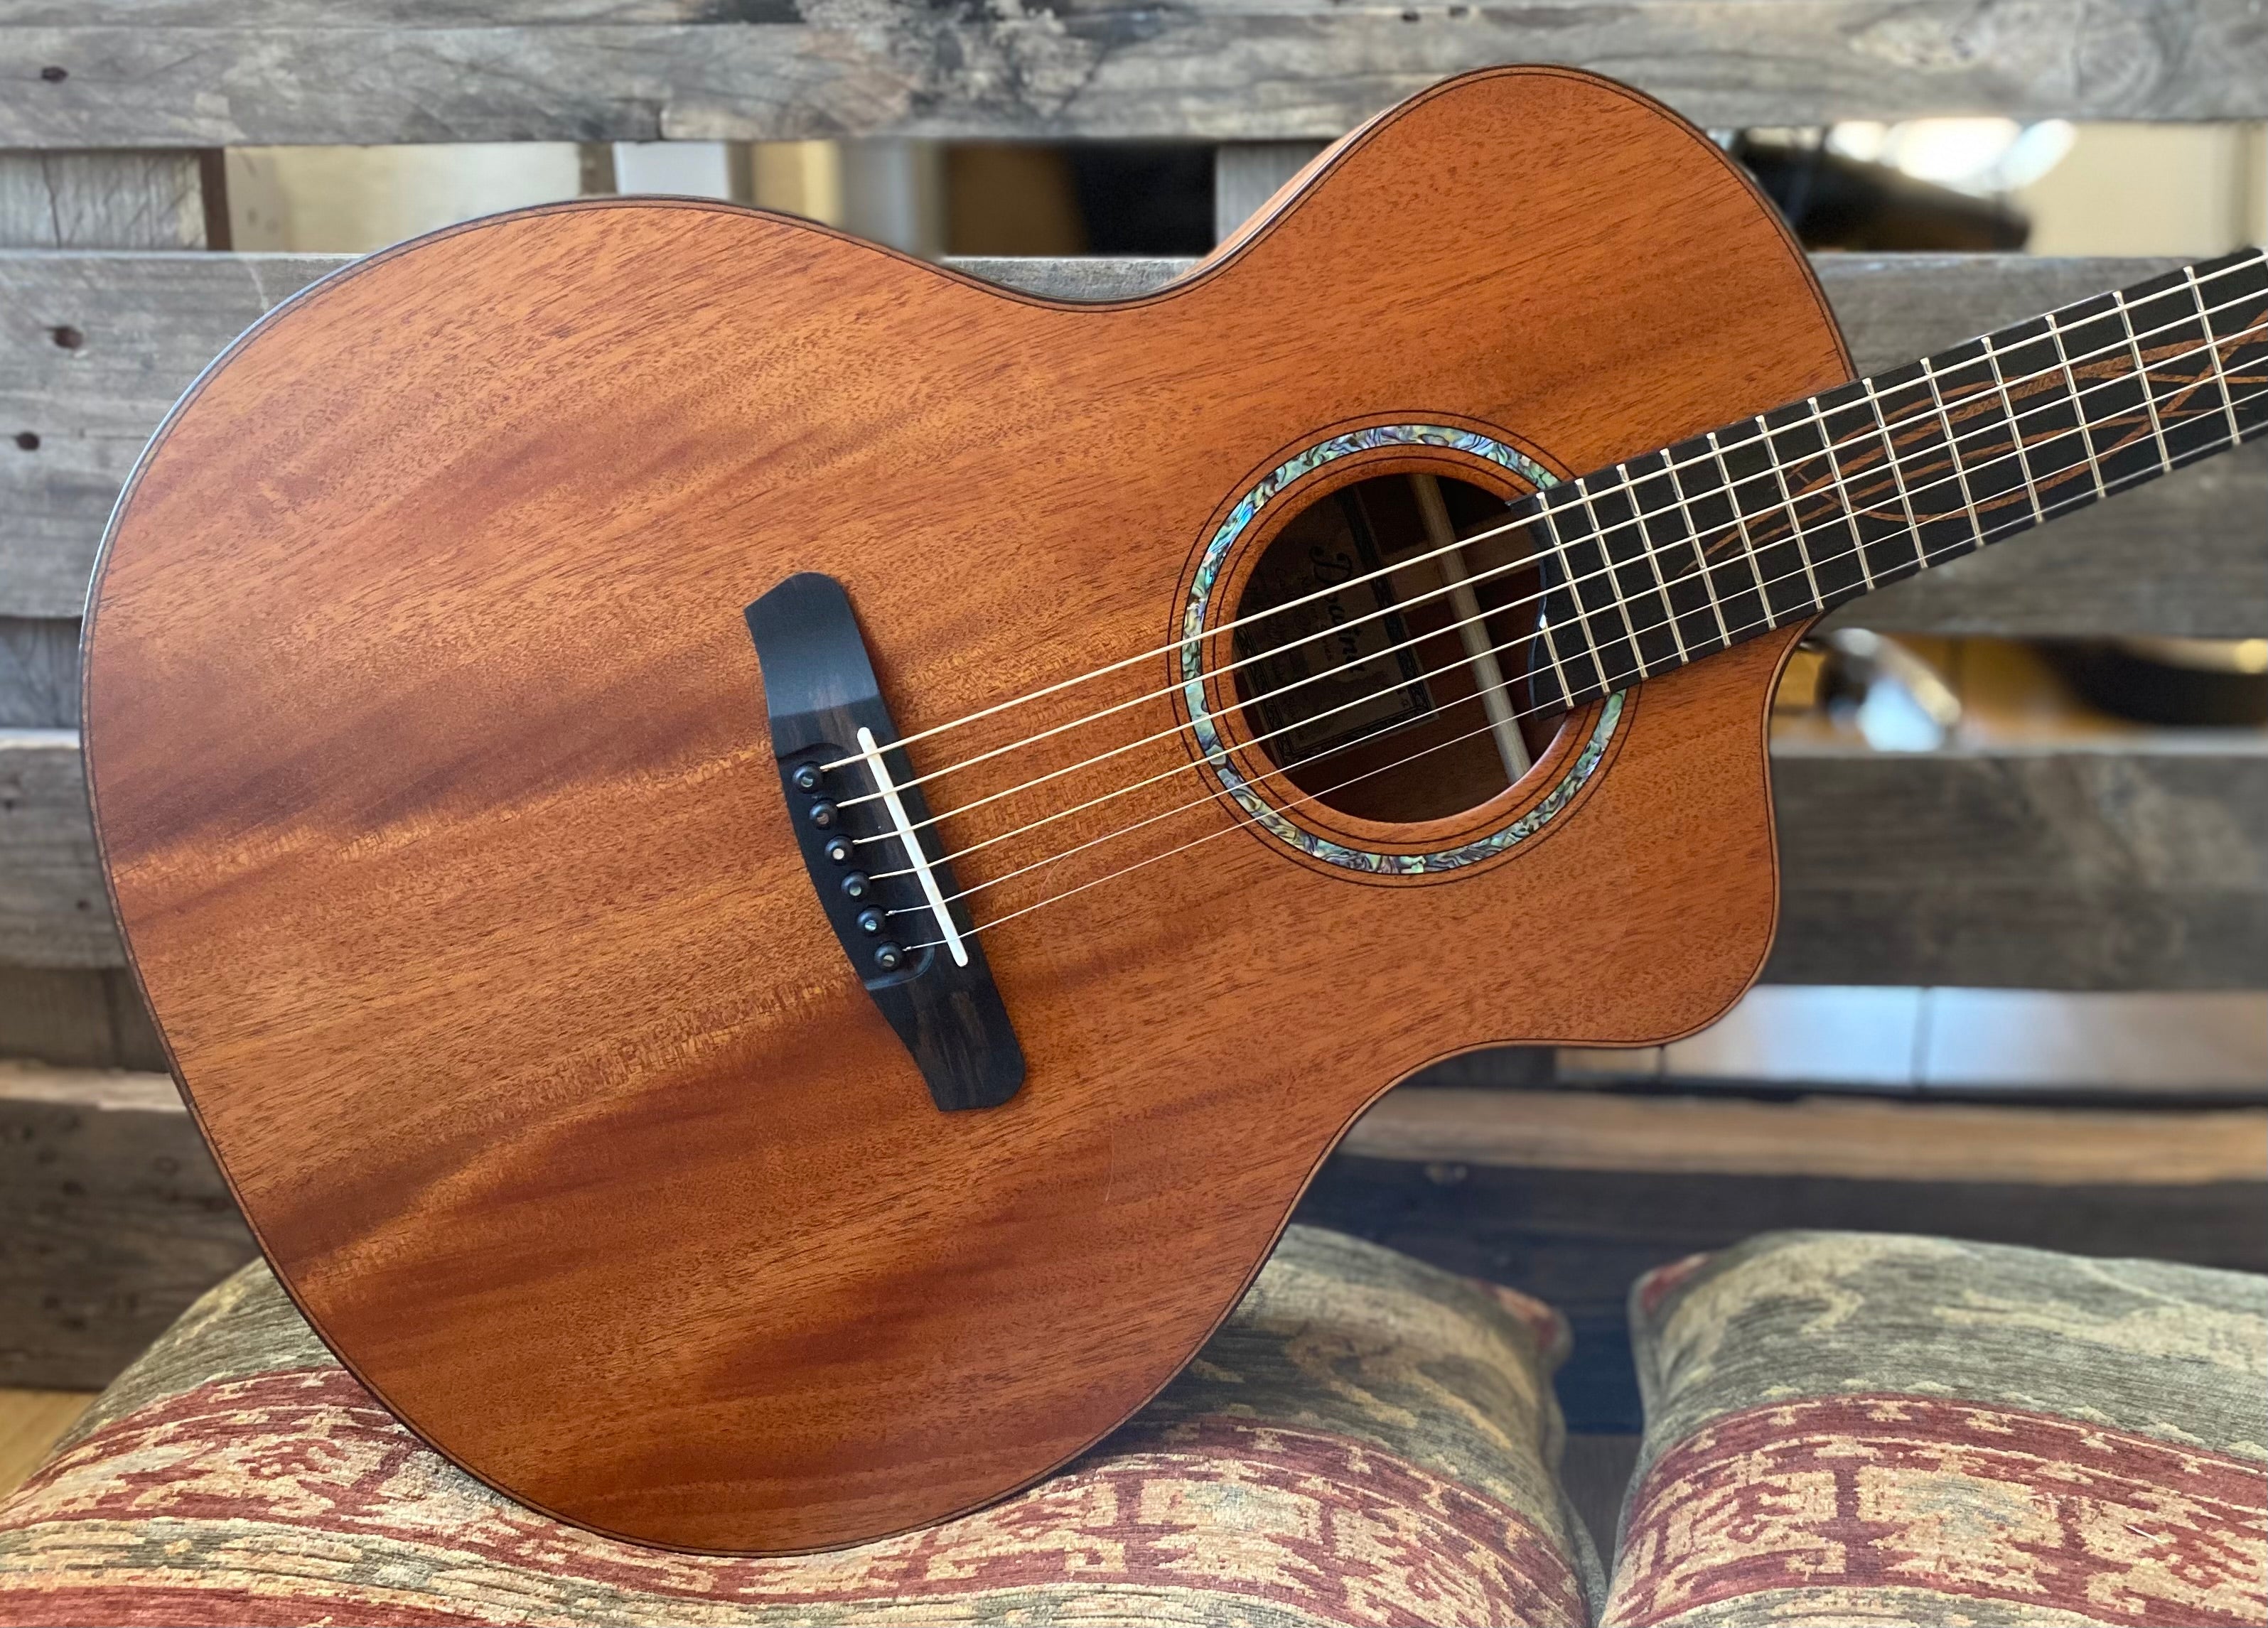 Dowina Tribute To Honduran Mahogany GAC (15+ years old) Limited amount., Acoustic Guitar for sale at Richards Guitars.